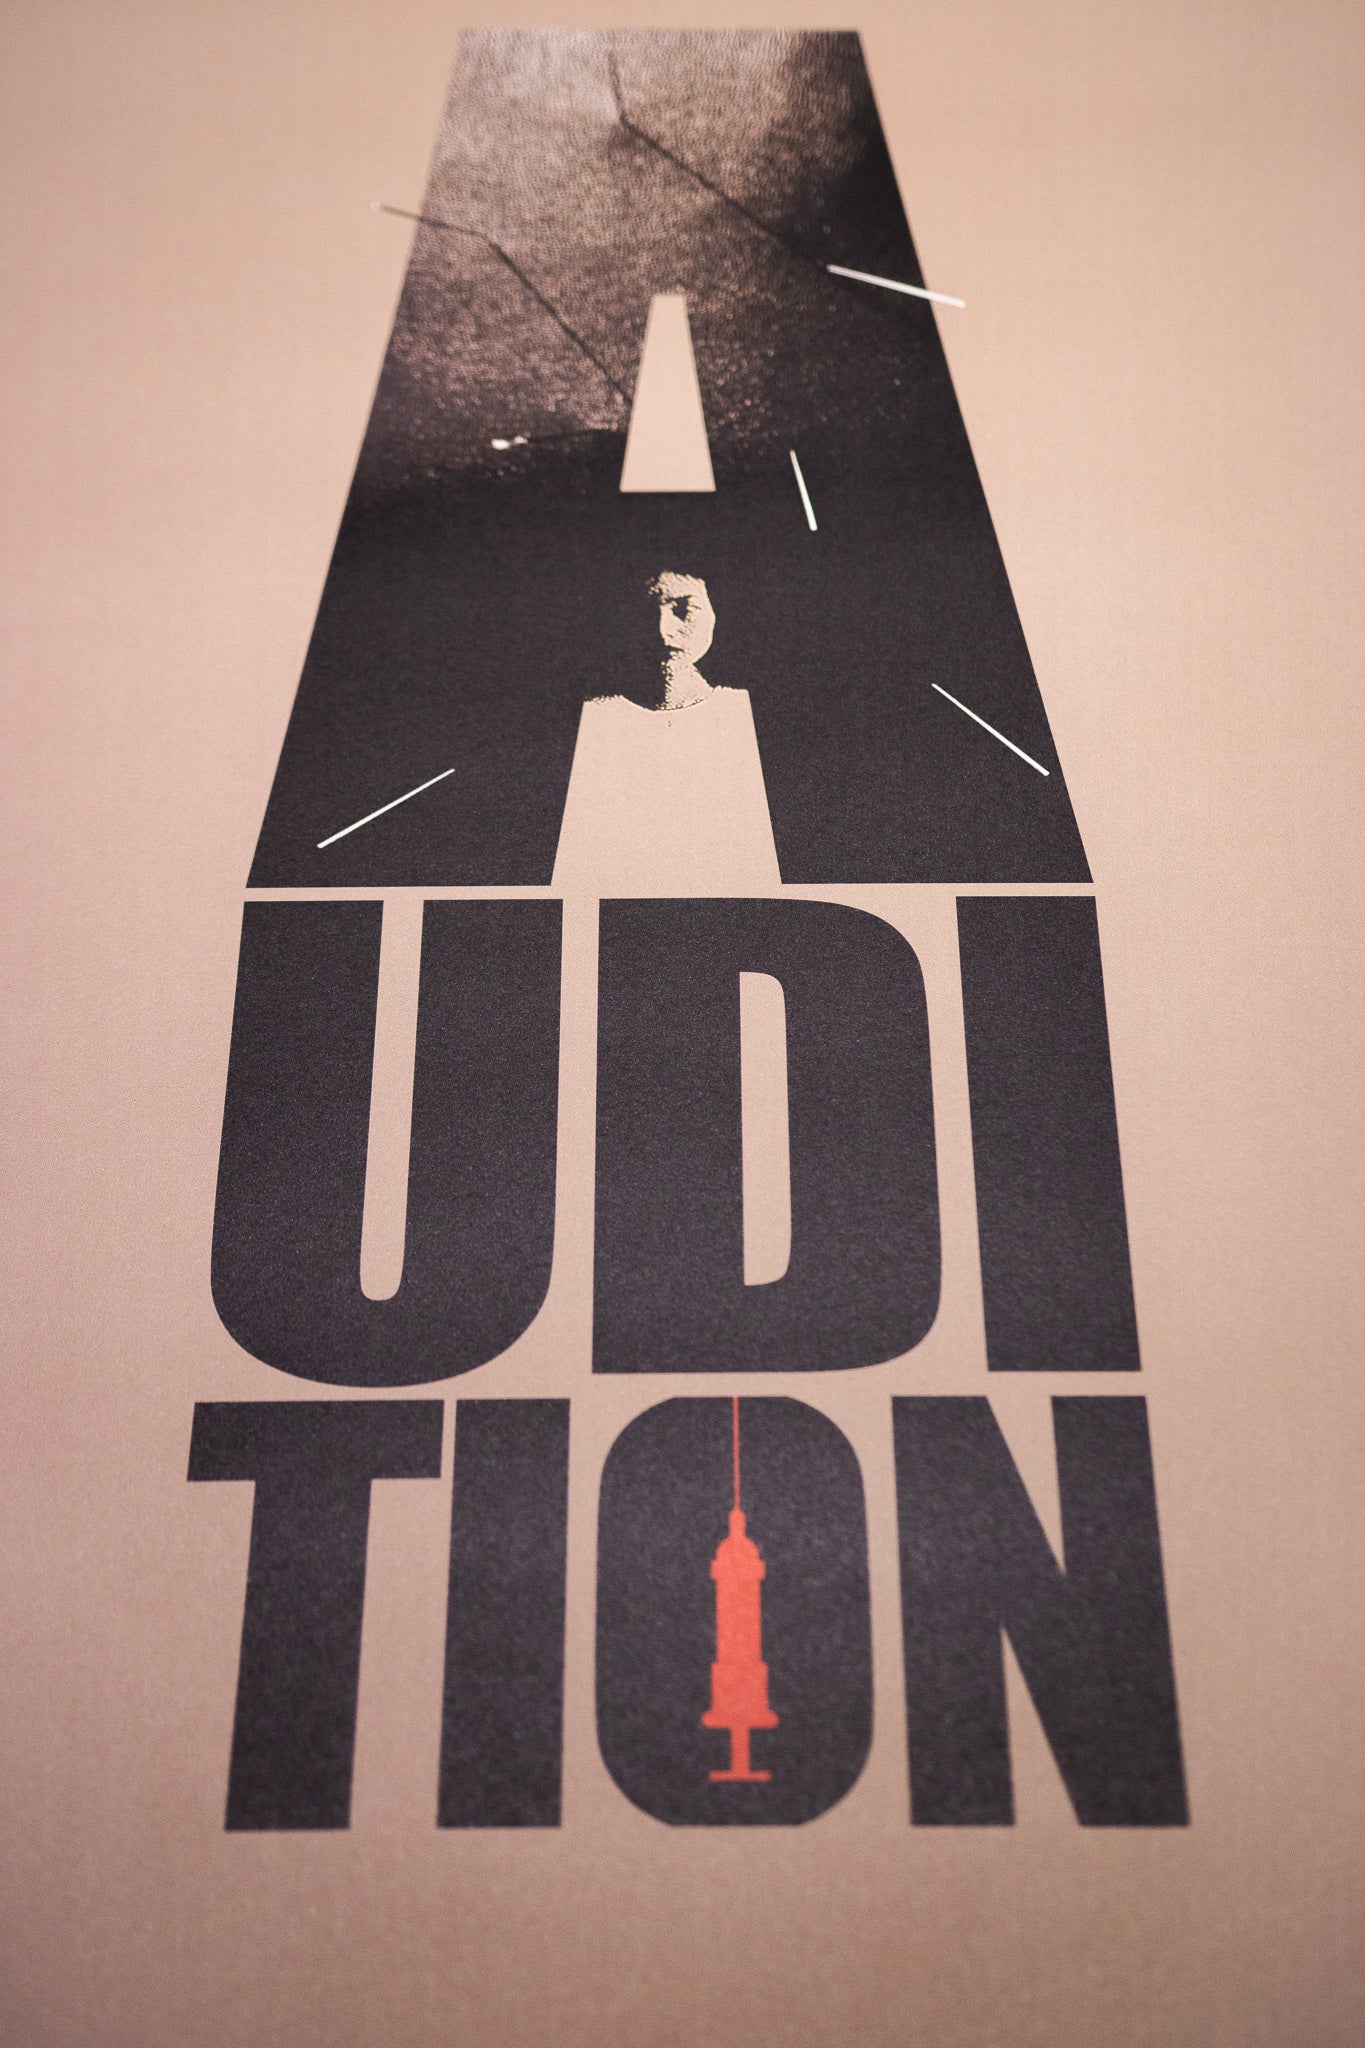 Affiche collector "Audition"